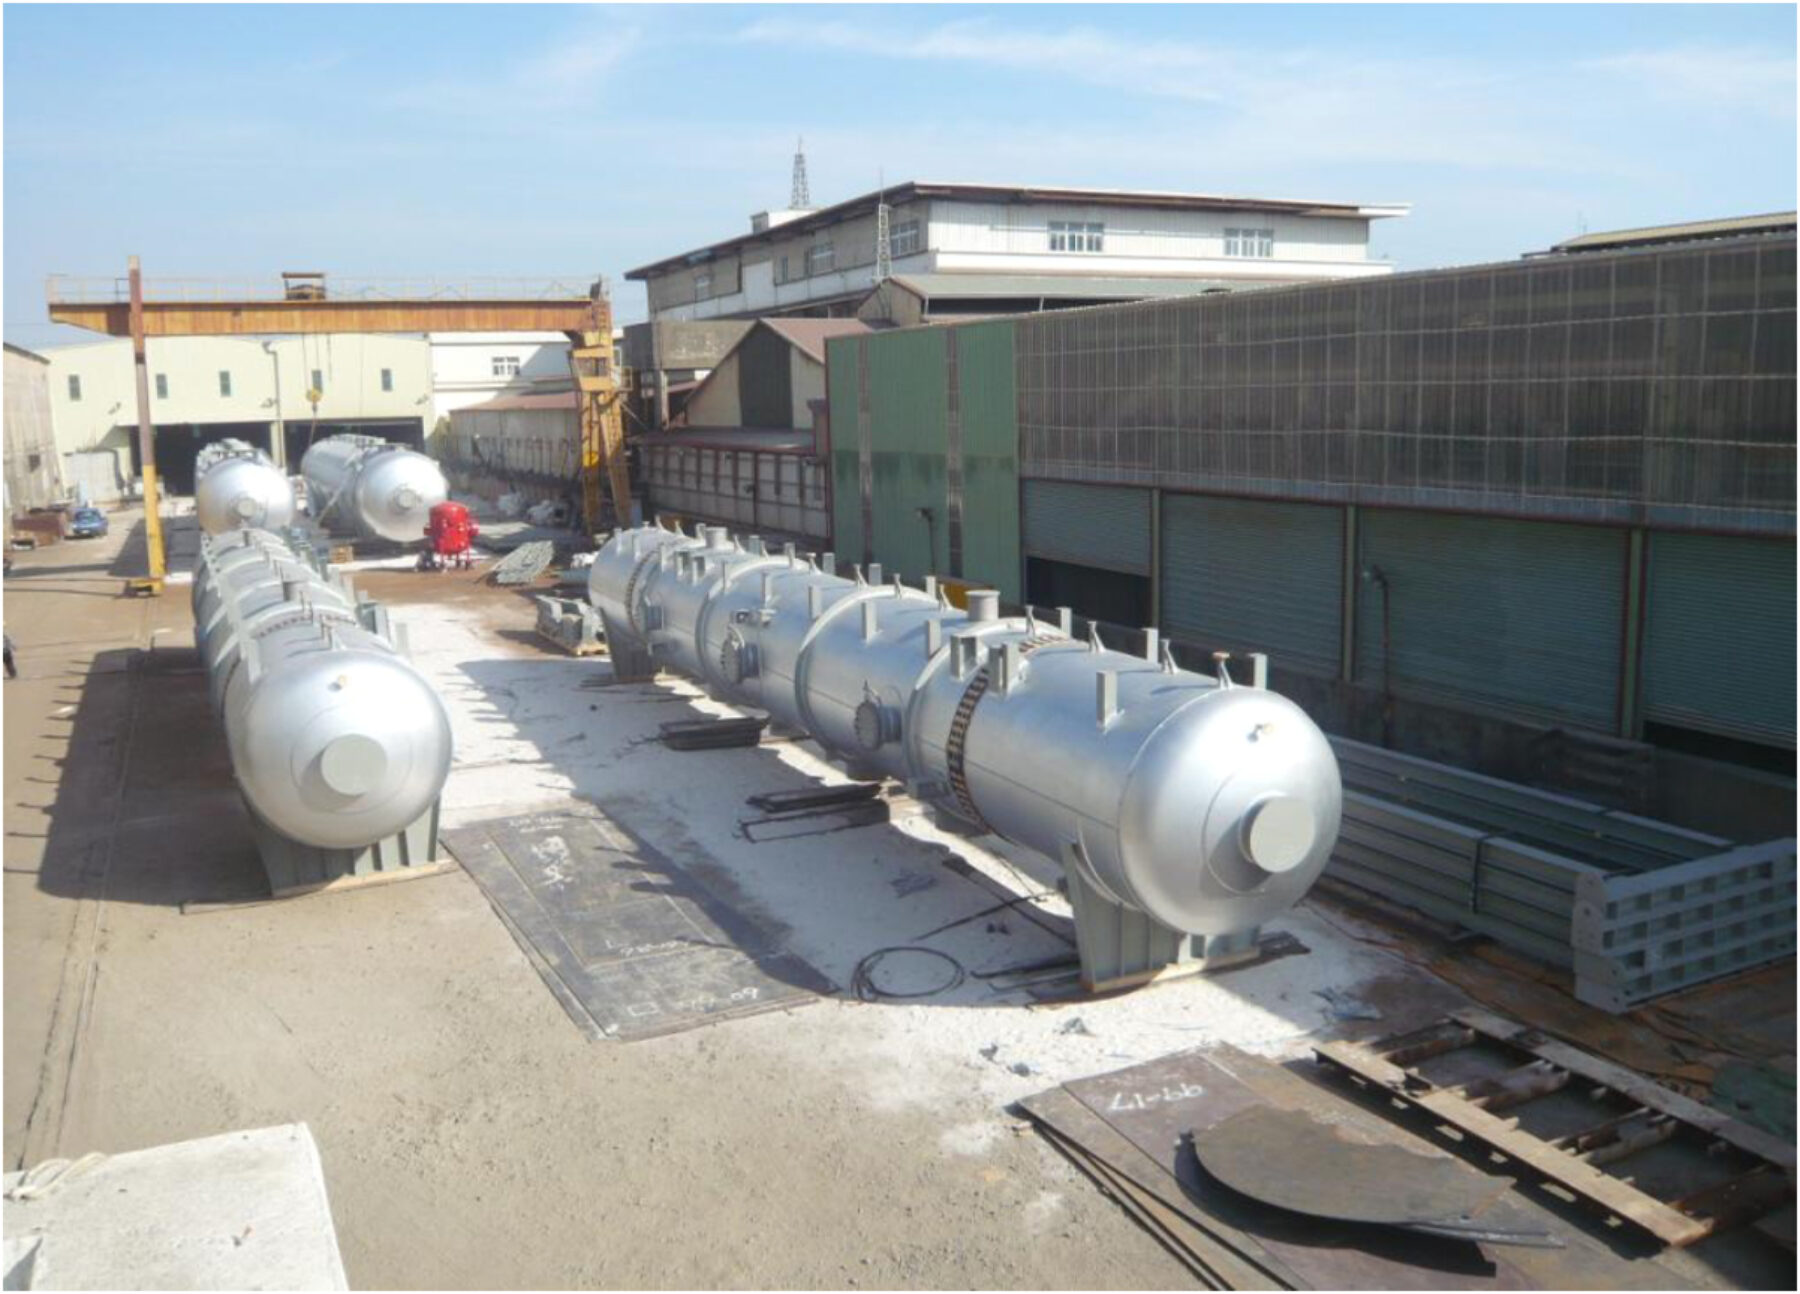 Four Cochrane counterflow deaerator units sit outside an industrial or manufacturing warehouse consisting of horizontally positioned metal vessels with numerous support points